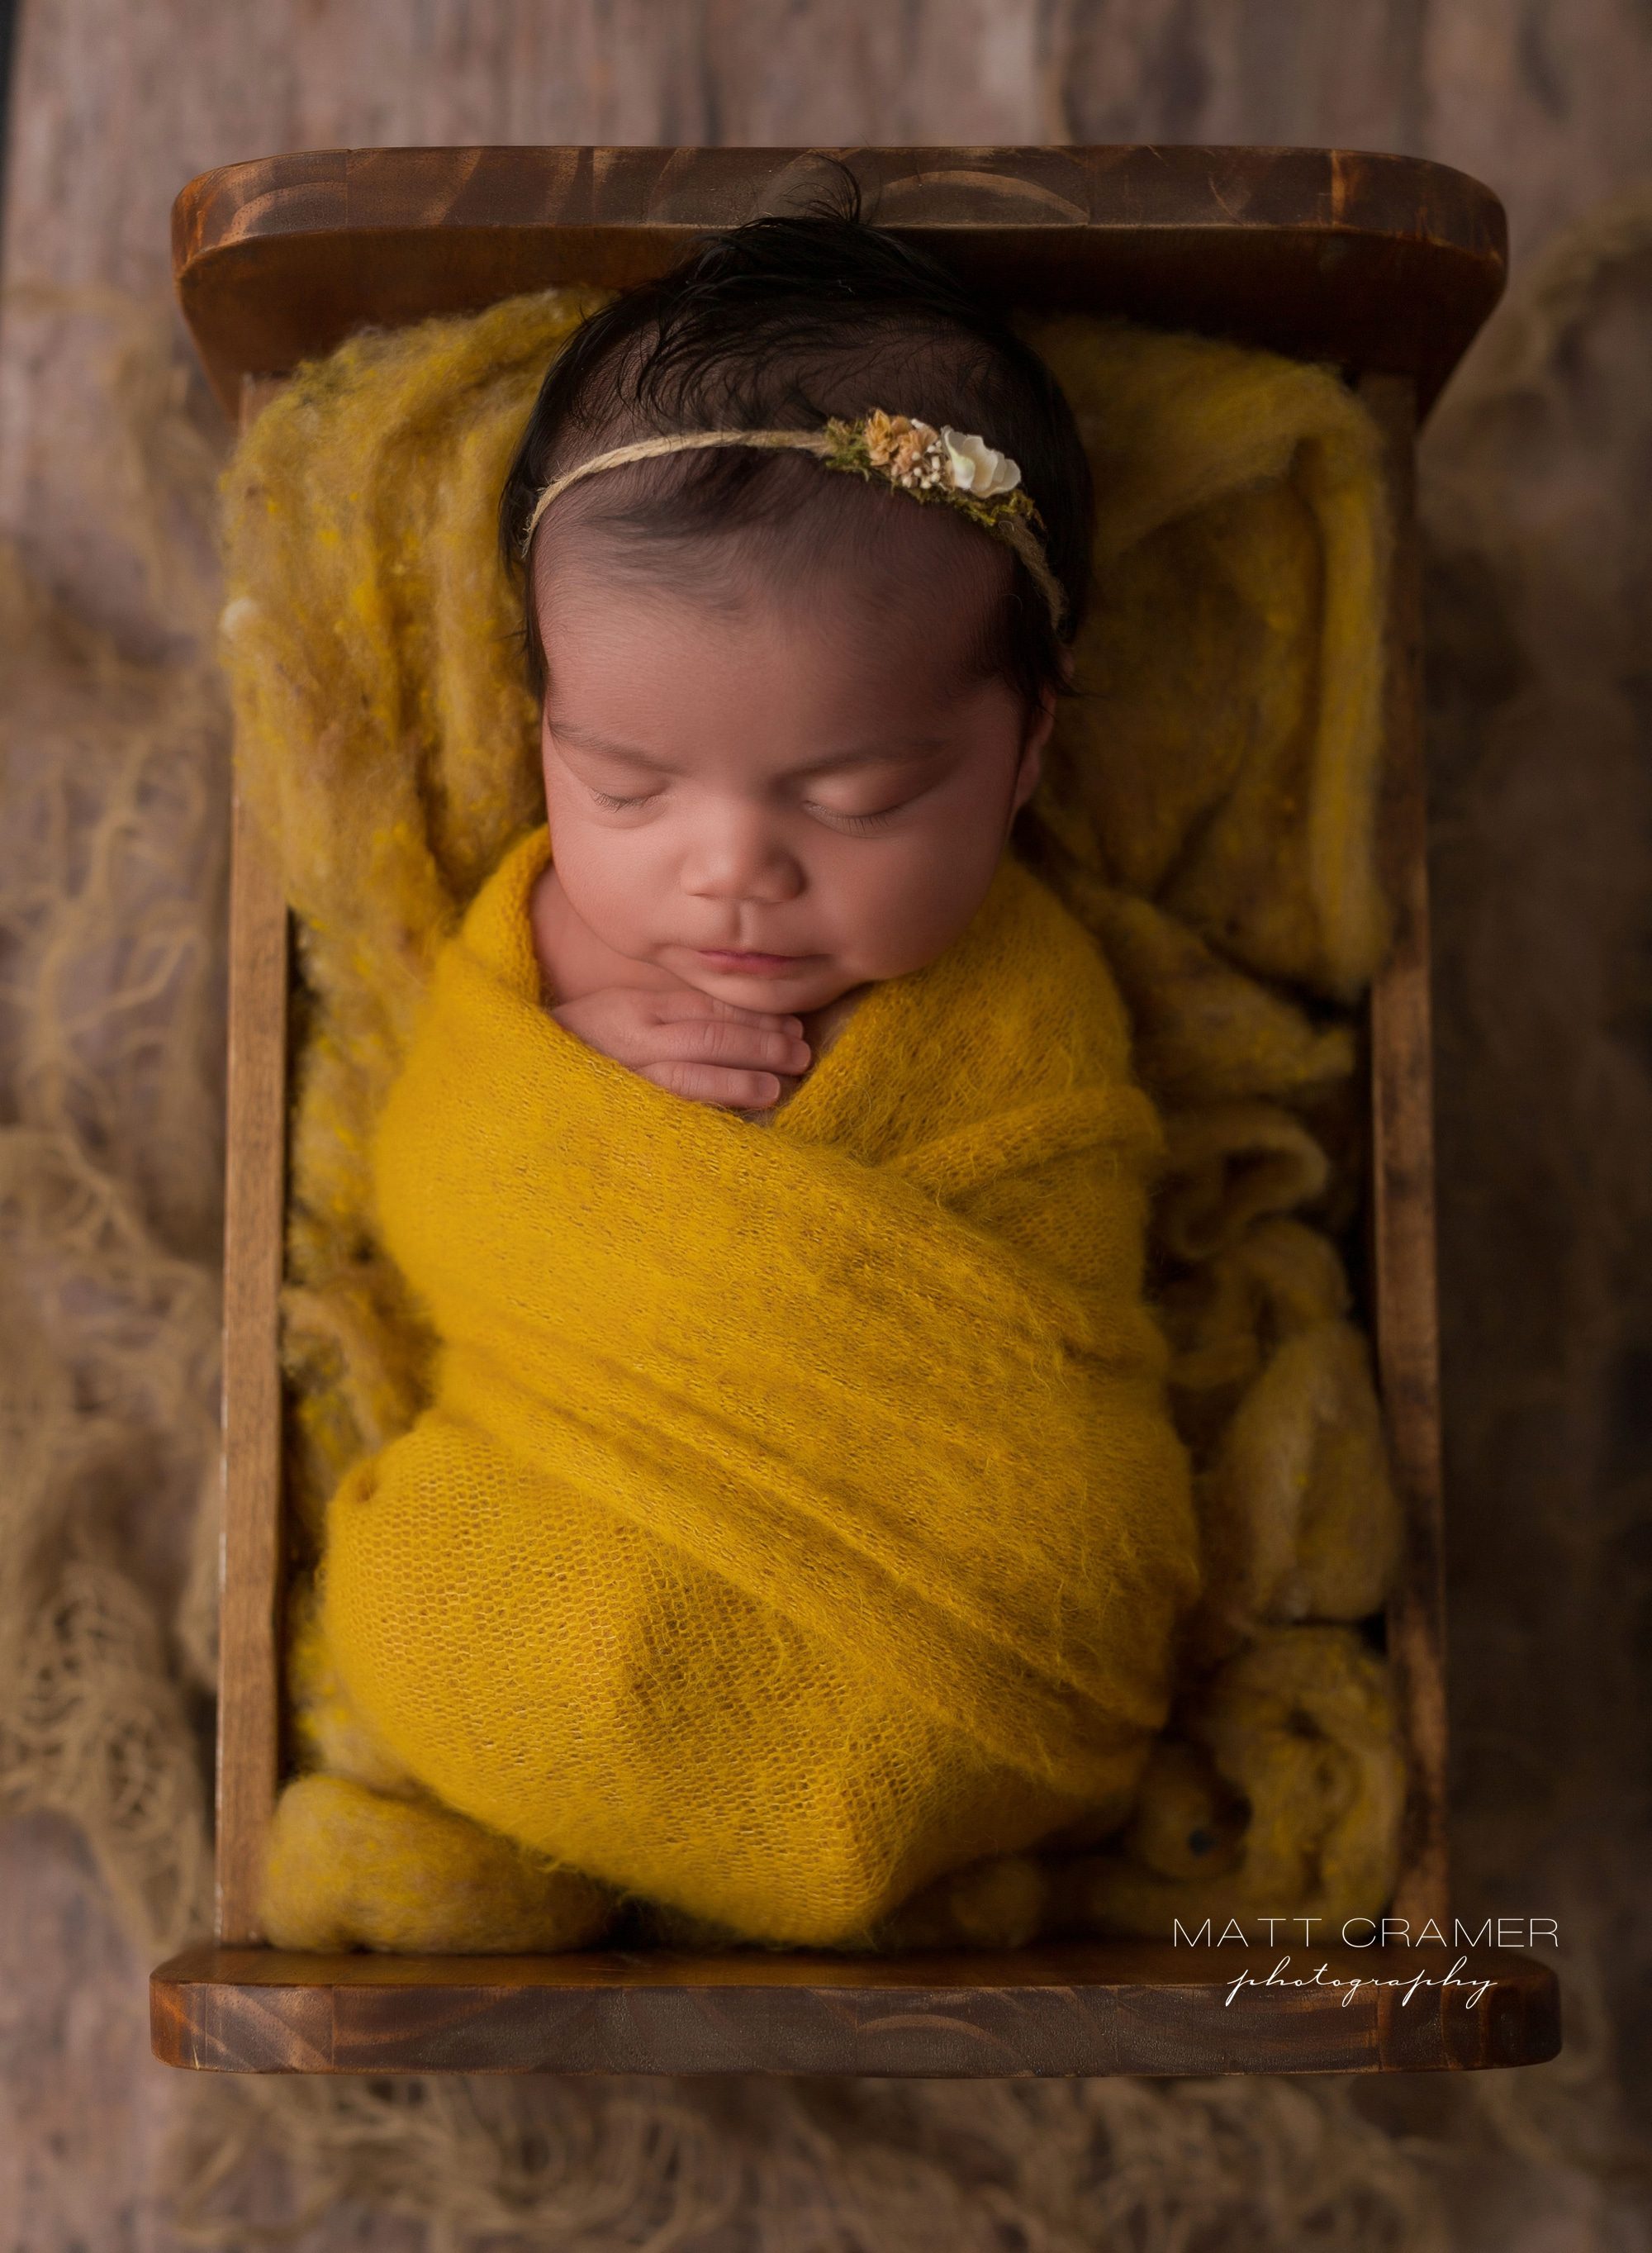 Newborn baby girl sleeping in baby bed while being photographed at her Newborn Photography in Los Angeles